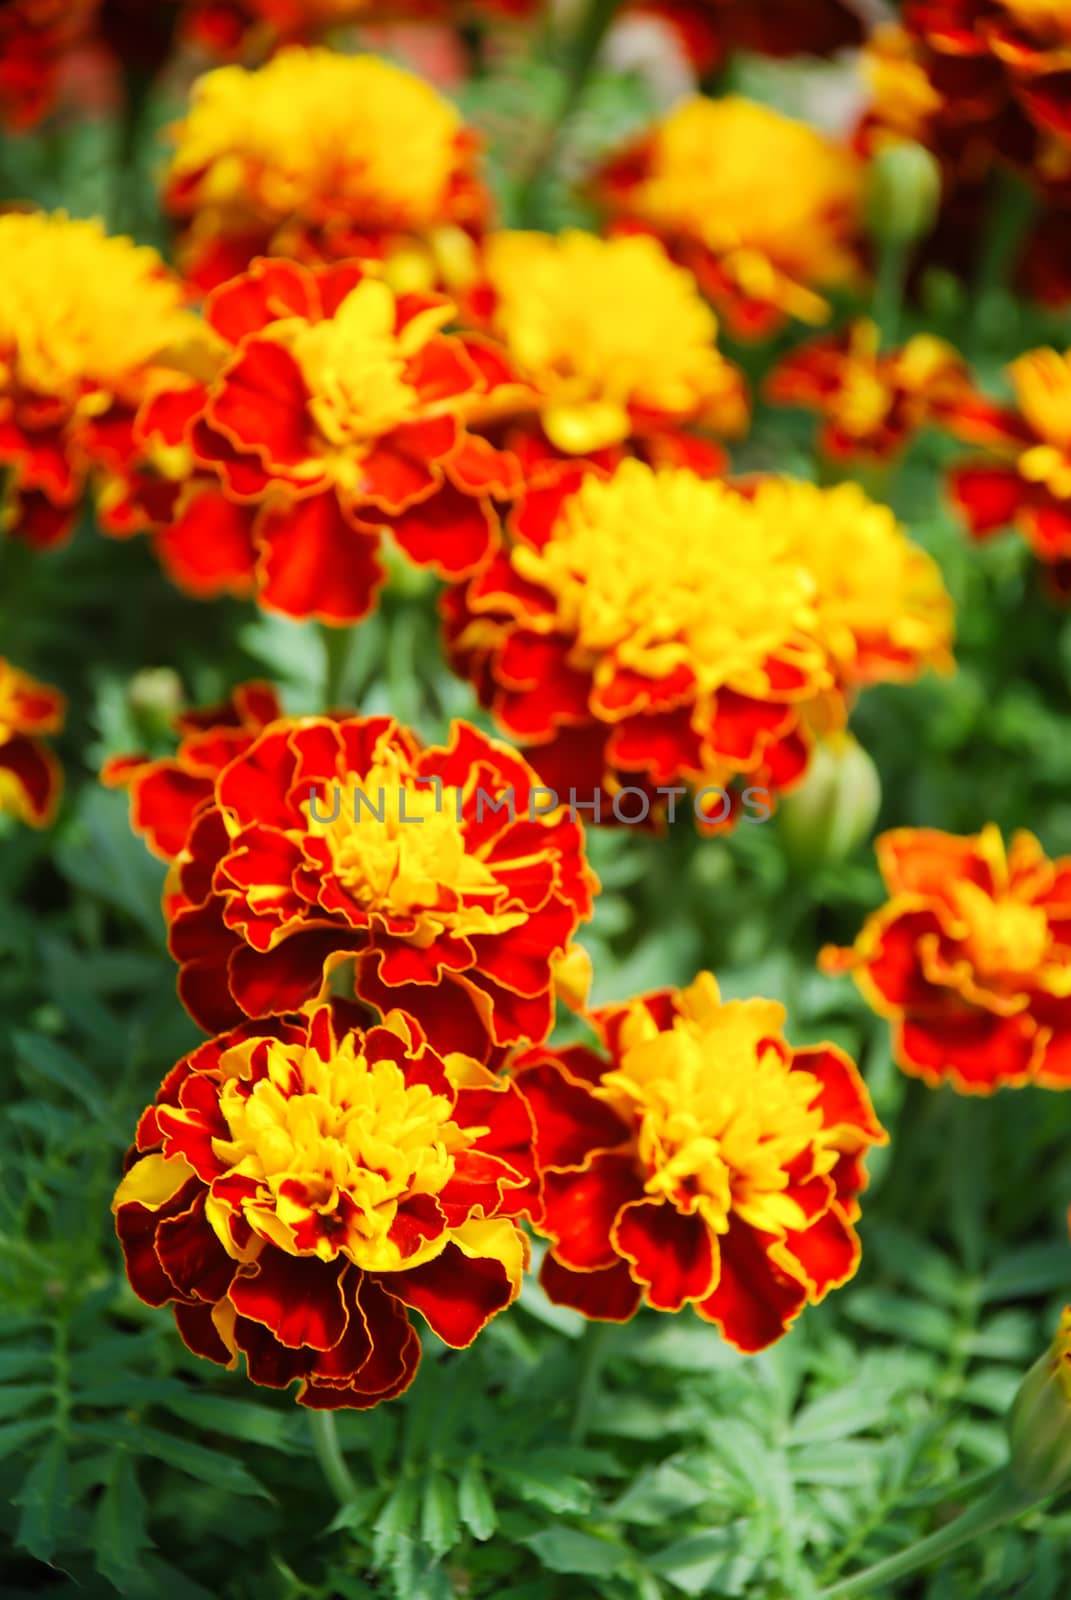 Tagetes patula french marigold in bloom, orange yellow flowers,  by yuiyuize